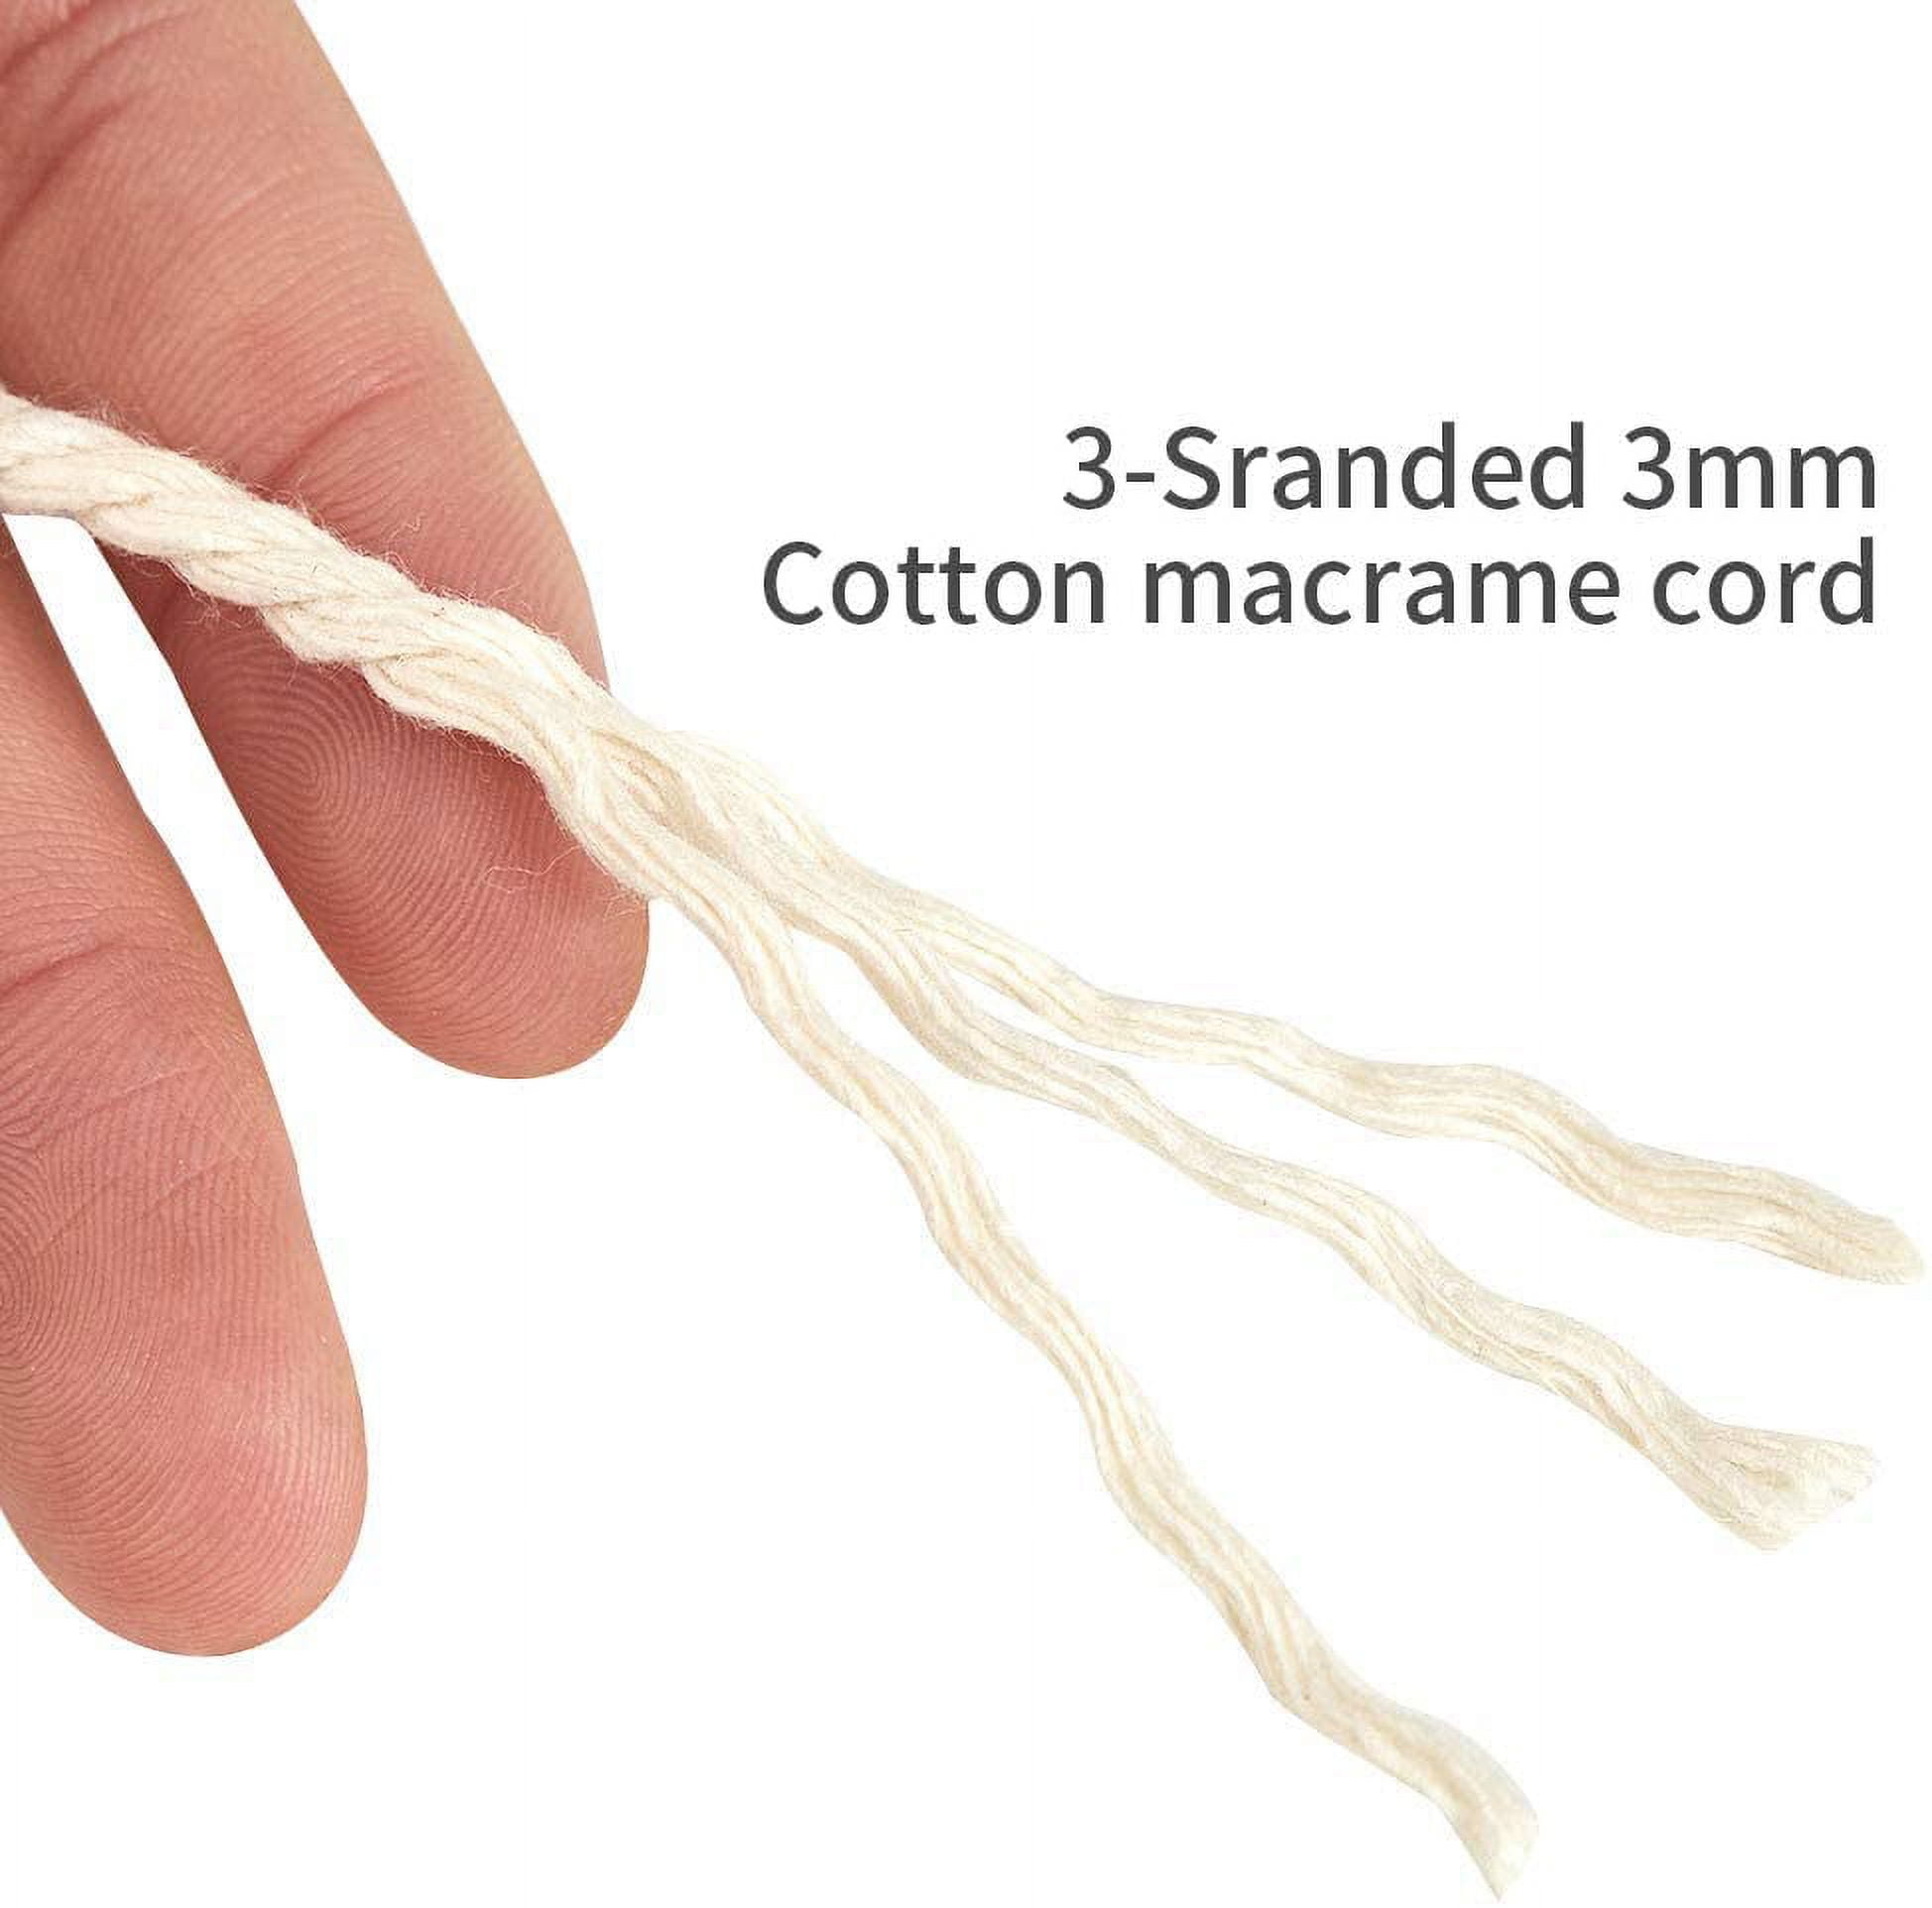 NOGIS Macrame Cord 3mm x 328Yards(984Feet), Natural Cotton Macrame Rope - 3  Strands Twisted Macrame Cotton Cord for Wall Hanging, Plant Hangers